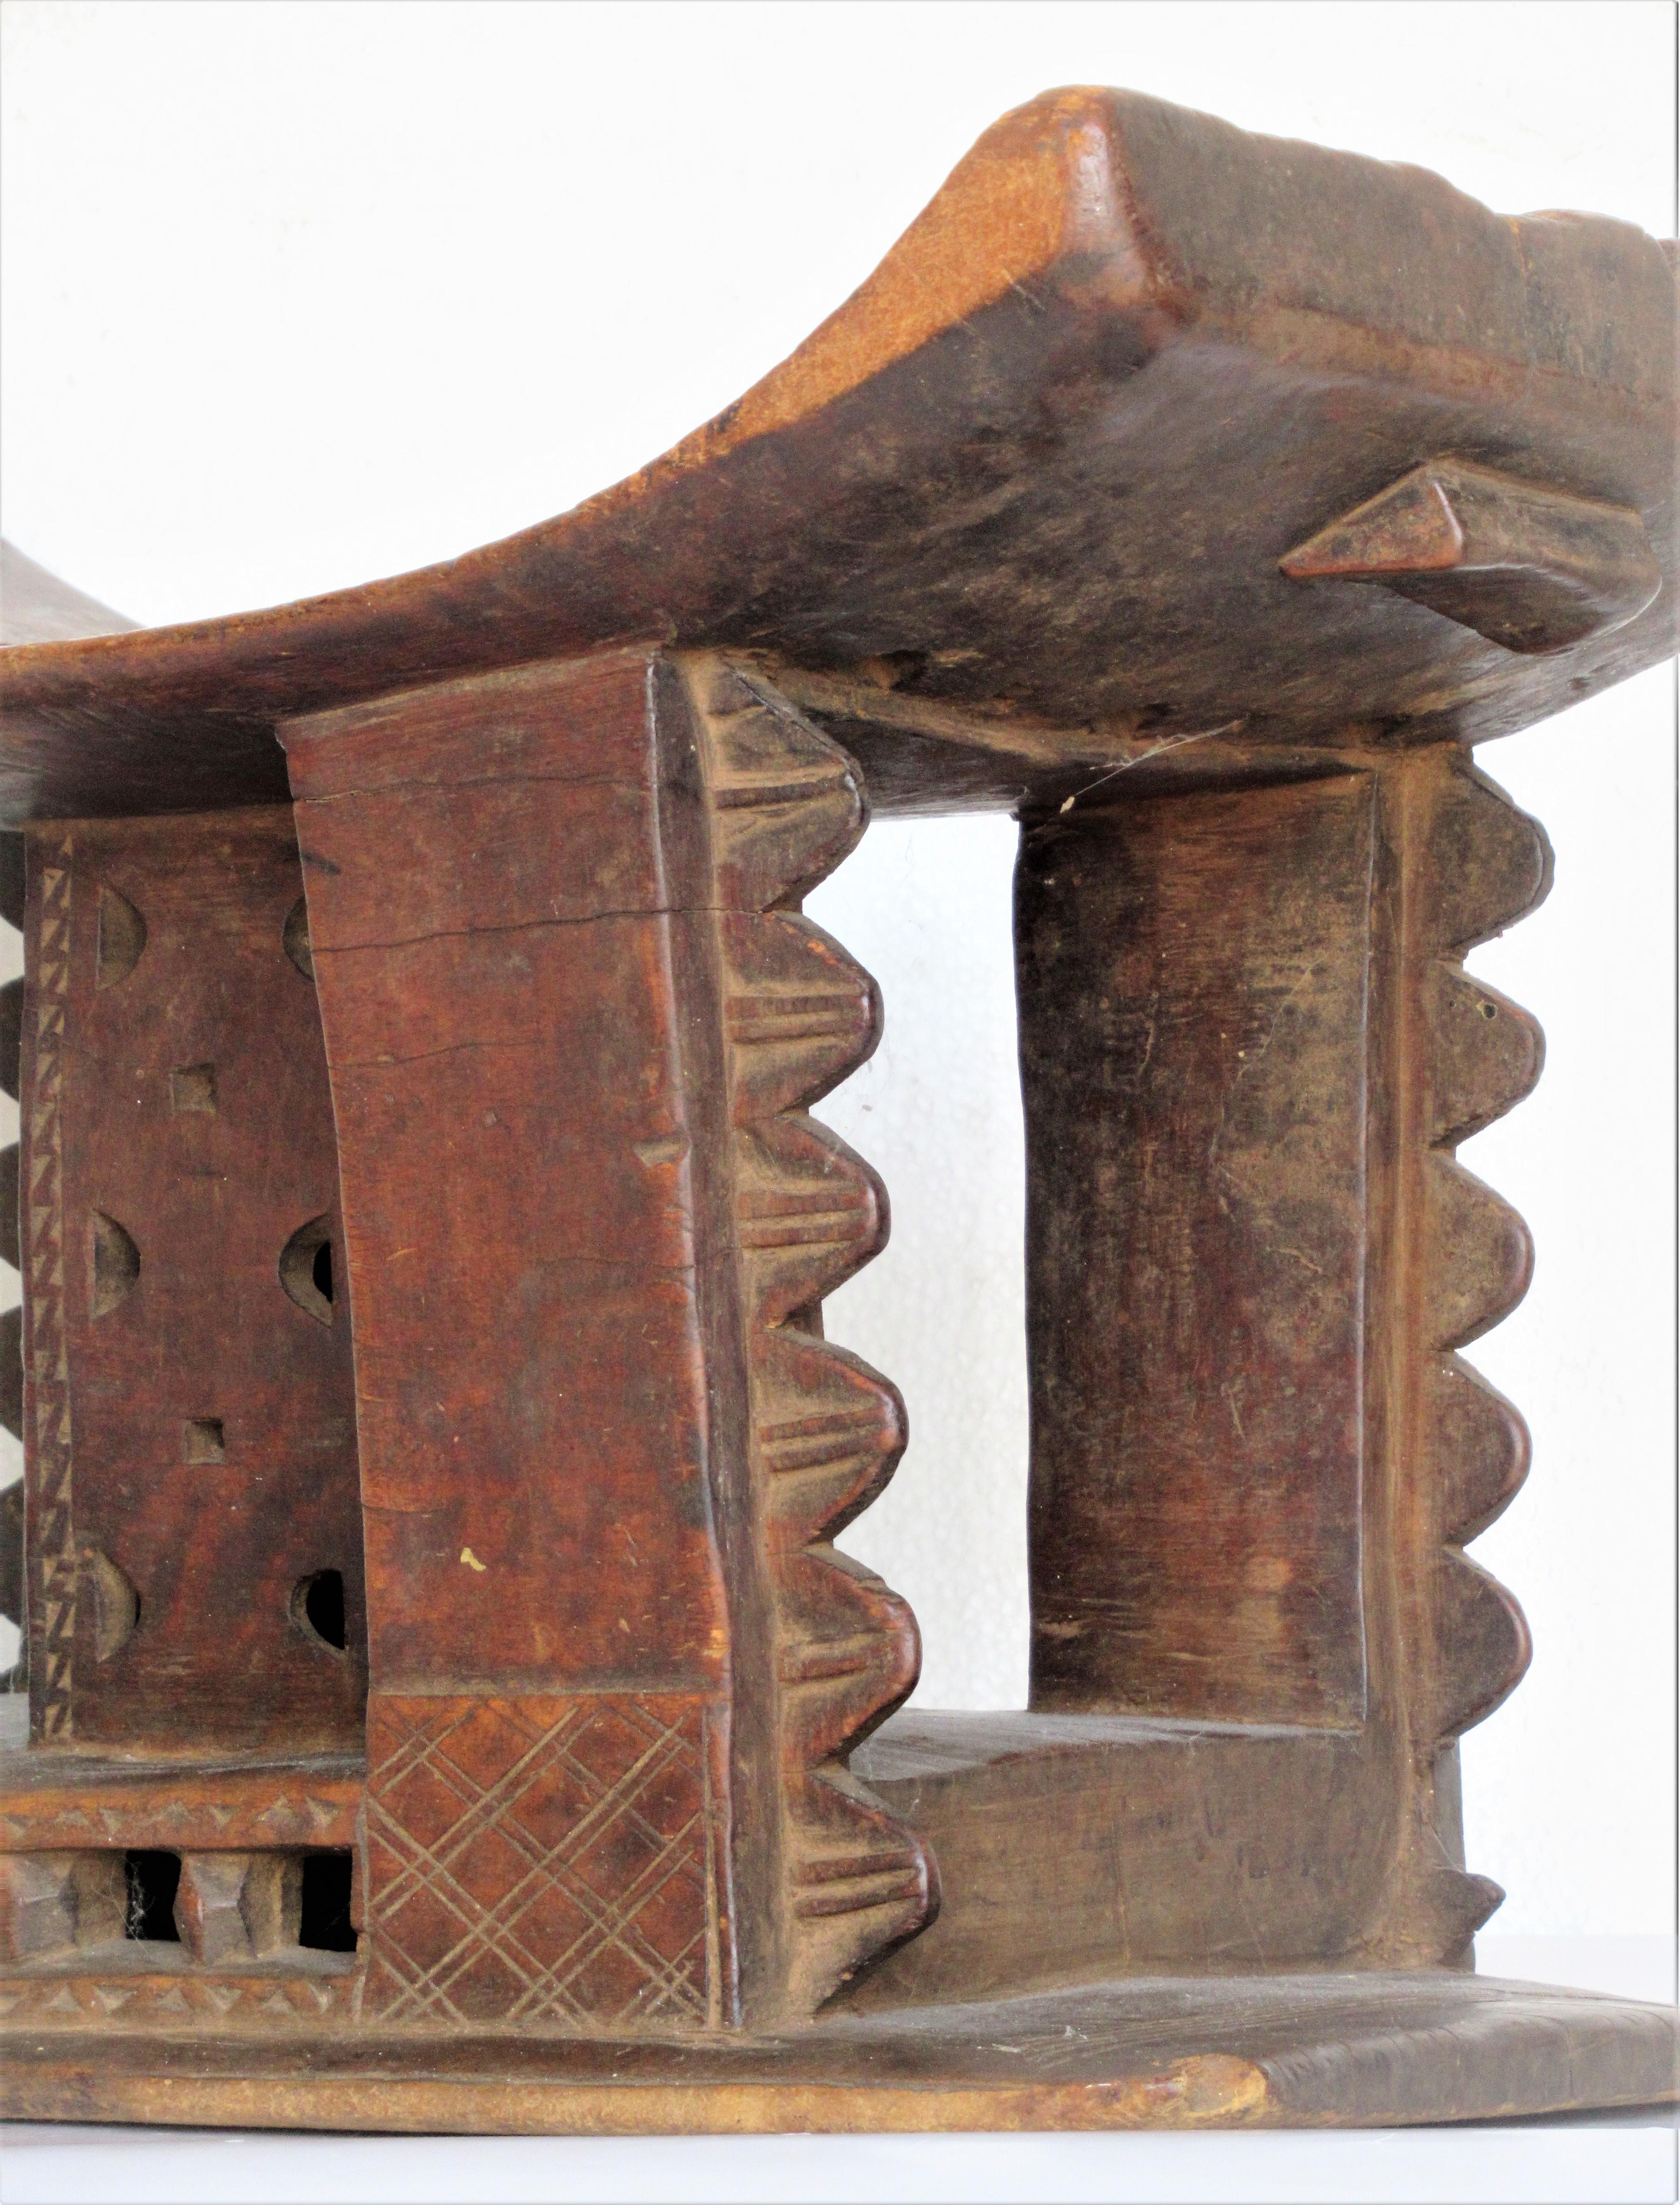 Classic Ashanti ( Asante ) stool from Ghana. Finely carved from a single piece of wood in beautifully aged old surface color. Early 20th century.
. Great looking and genuinely old. Look at all pictures and read condition report in comment section.